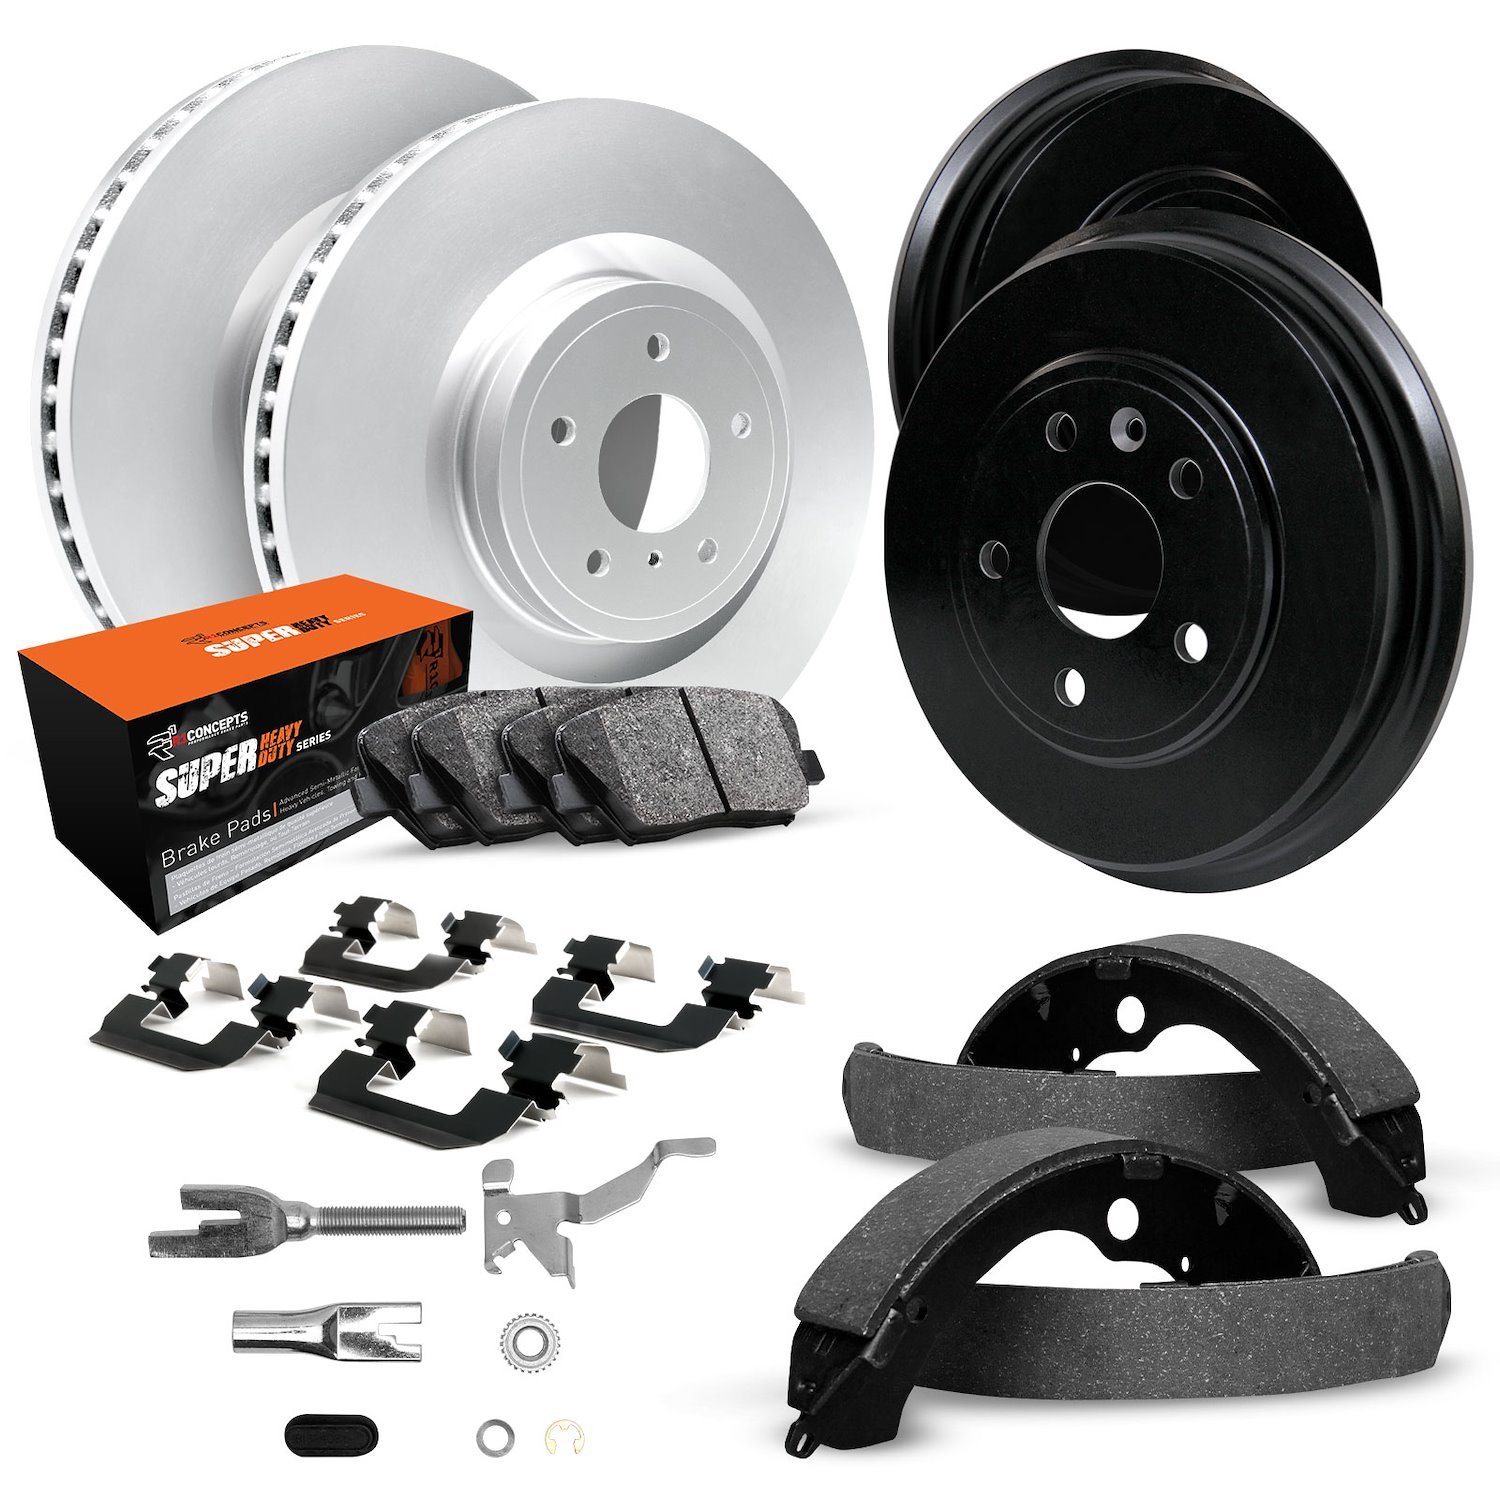 GEO-Carbon Brake Rotor & Drum Set w/Super-Duty Pads, Shoes, Hardware/Adjusters, 1995-2000 GM, Position: Front & Rear